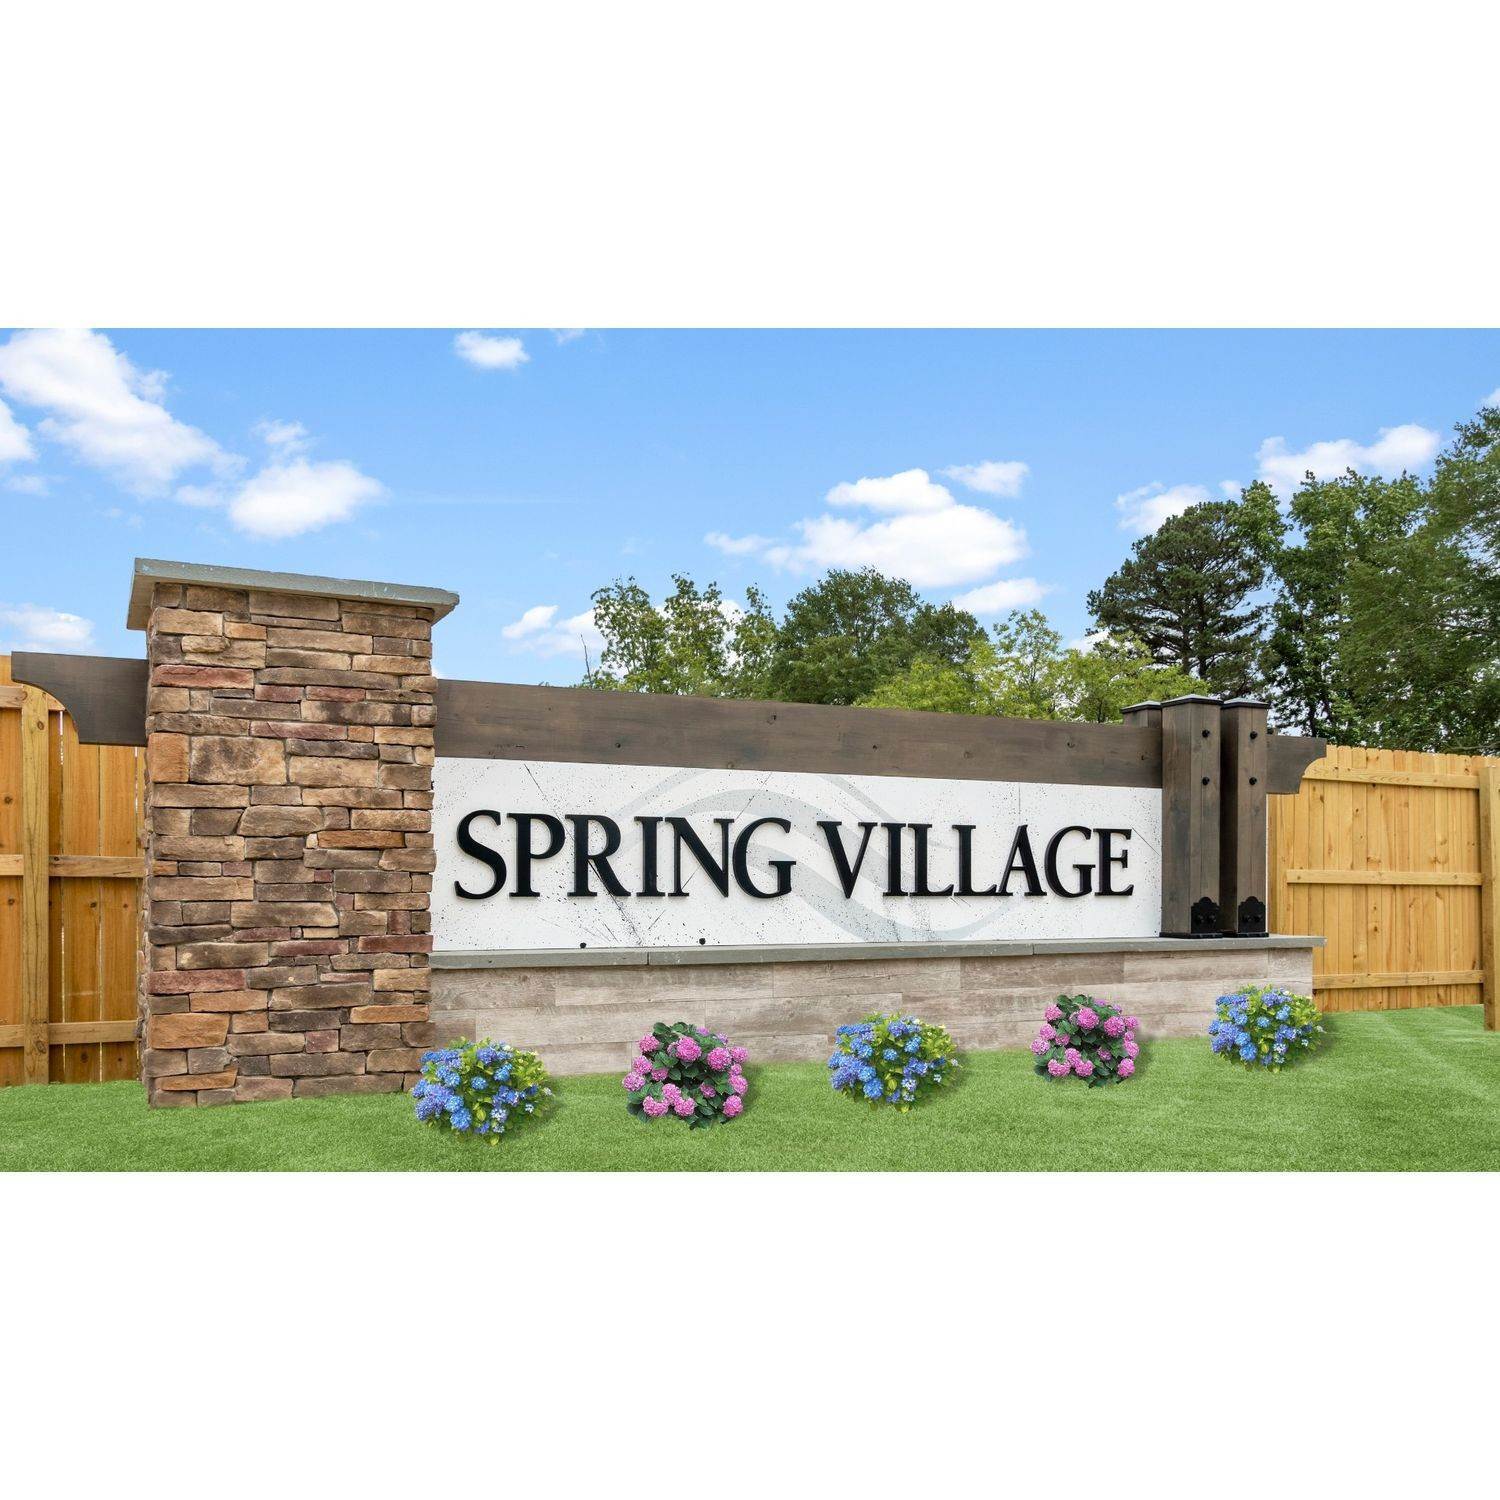 Spring Village building at 1133 Chalybeate Springs Rd, Angier, NC 27501